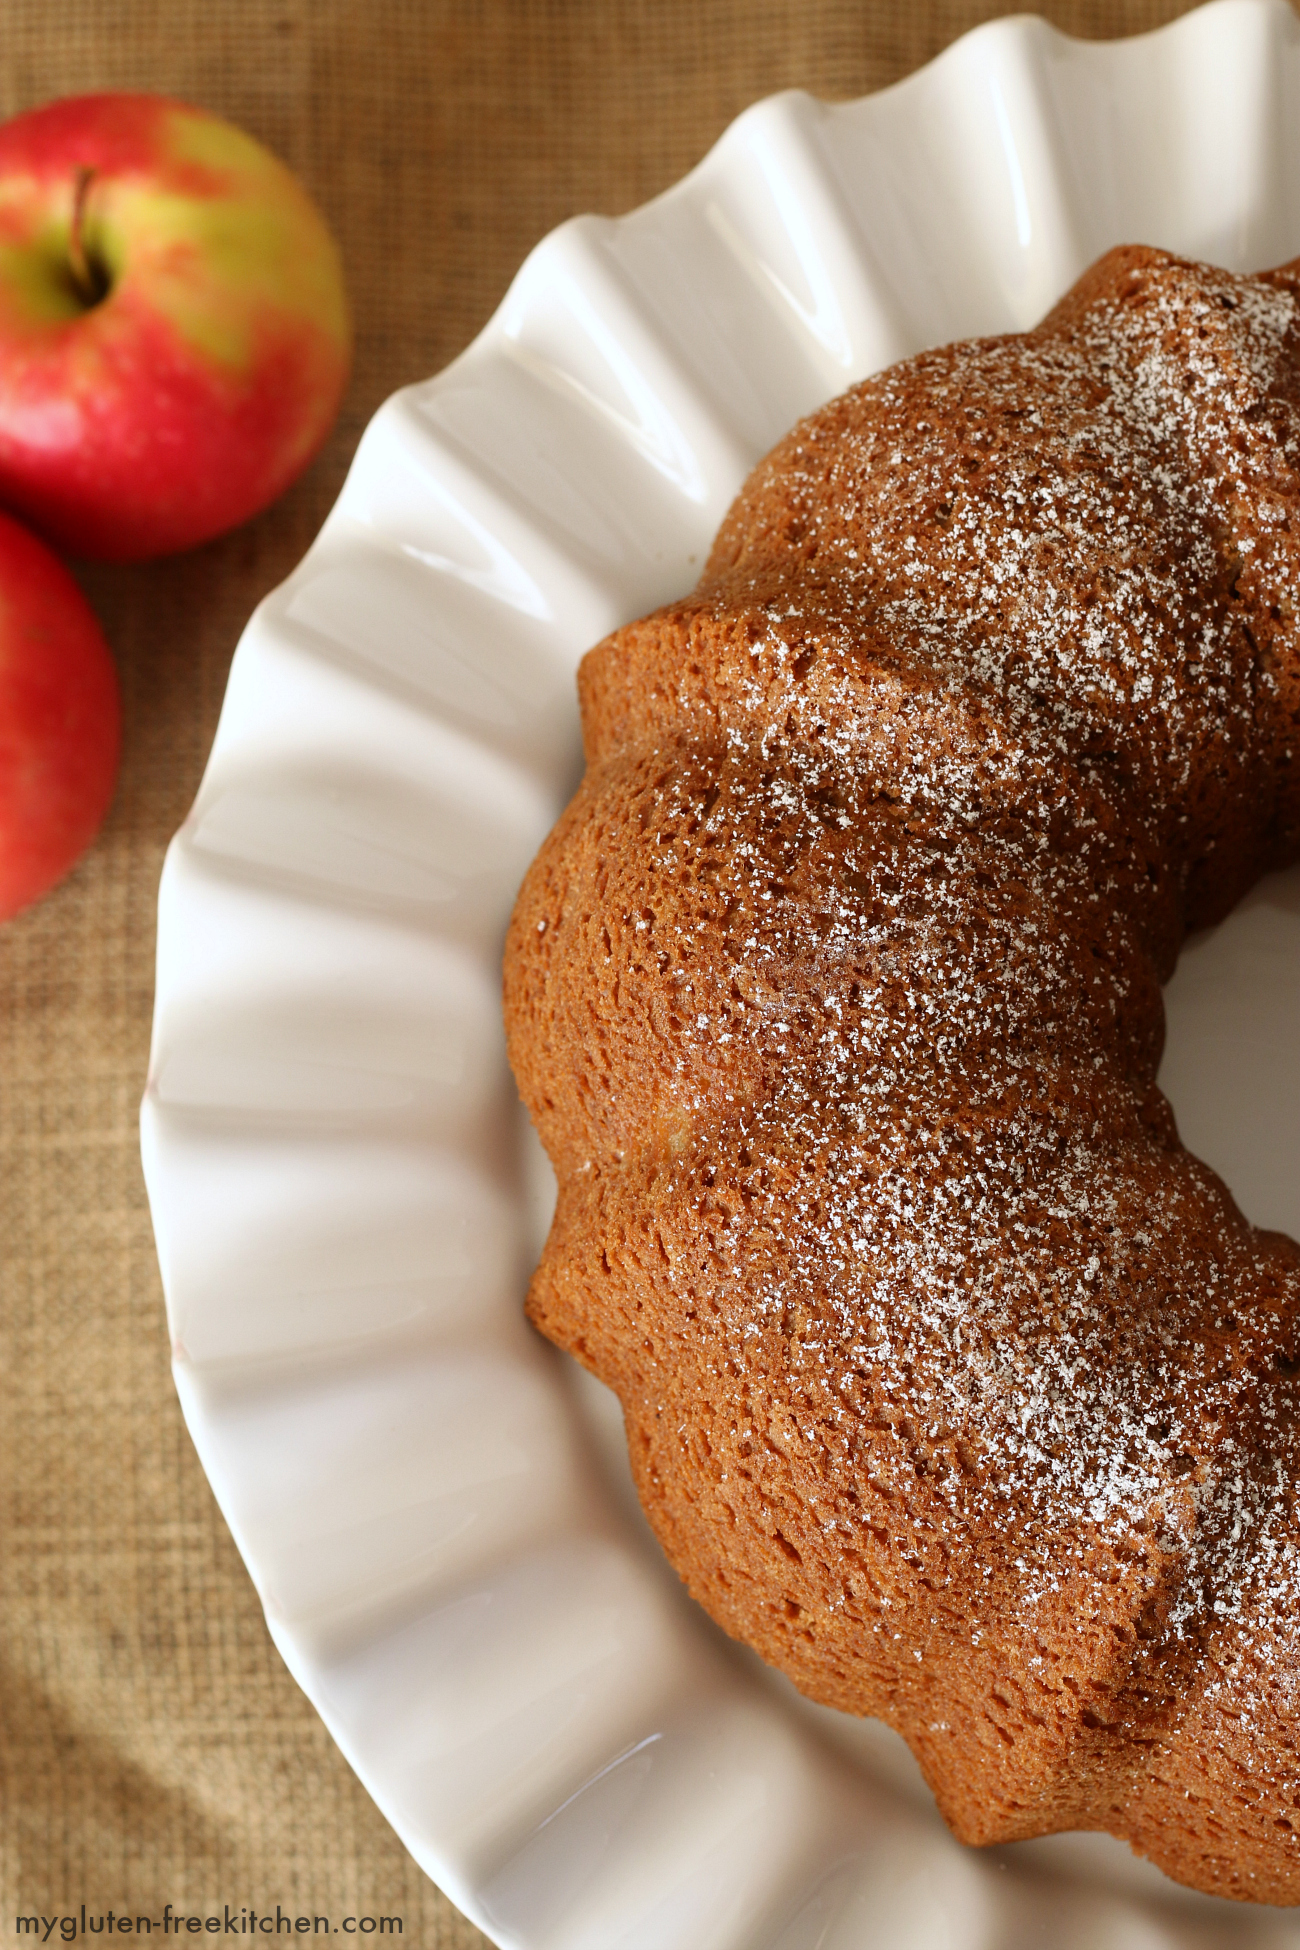 Gluten-free dairy-free Apple Cake Recipe. So moist and delicious and the powdered sugar was the perfect topping.